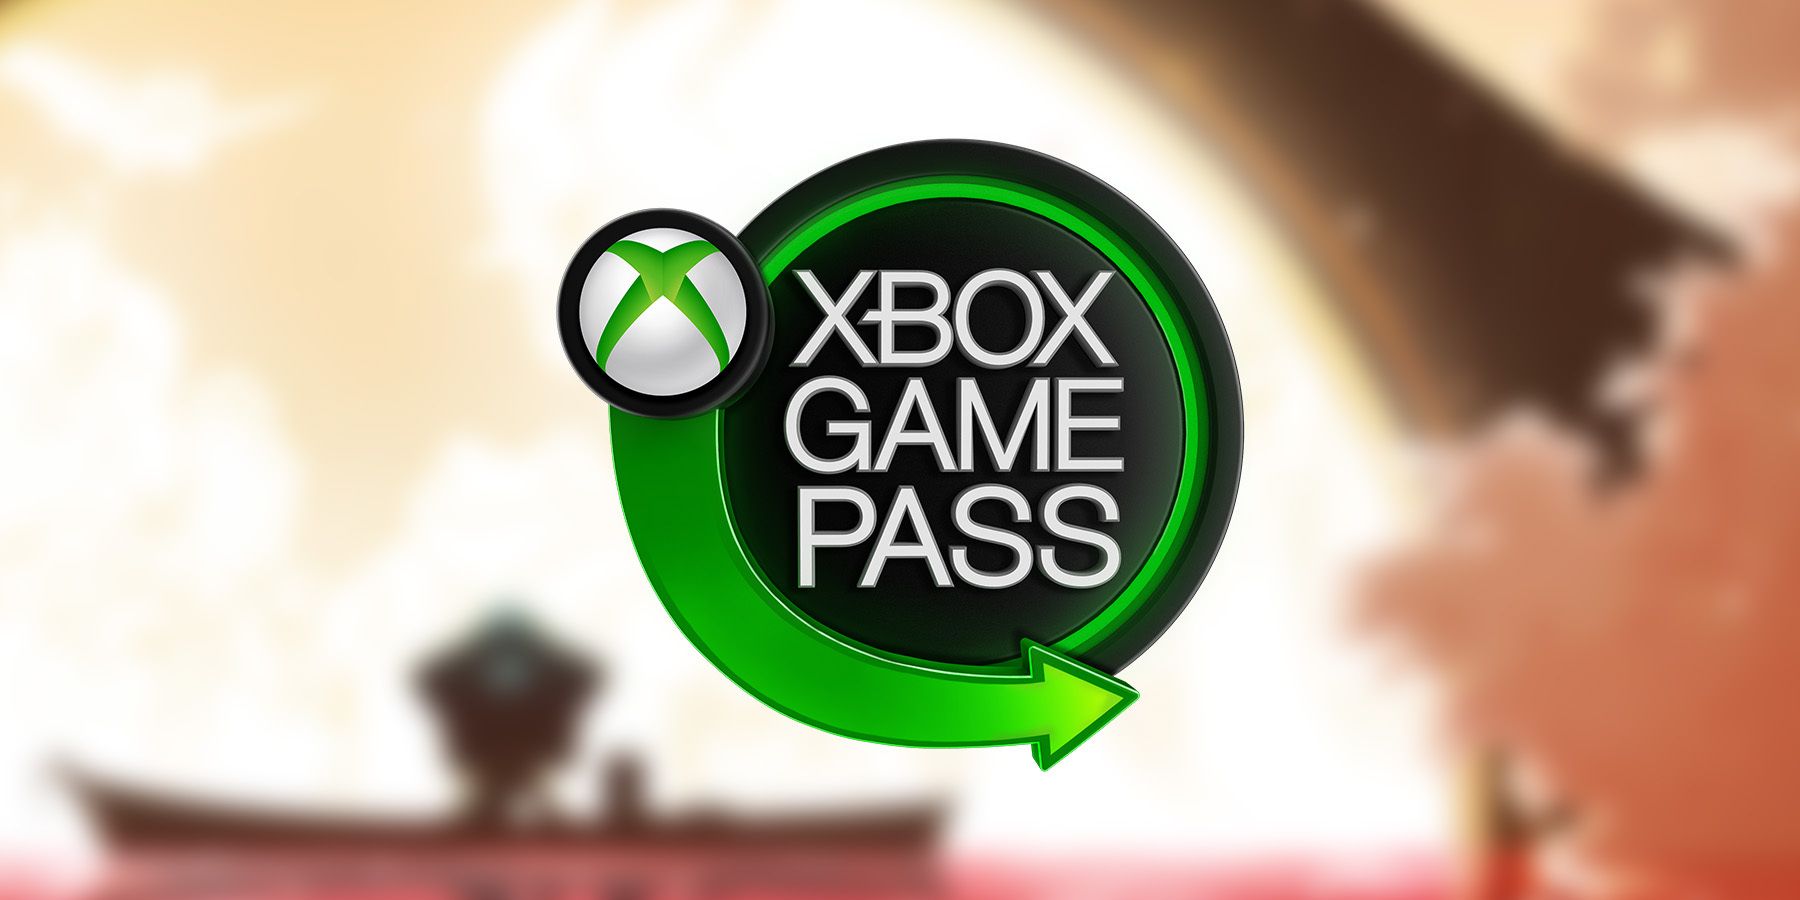 Surprise Xbox Game Pass Update Adds One of the Best Games Ever Made